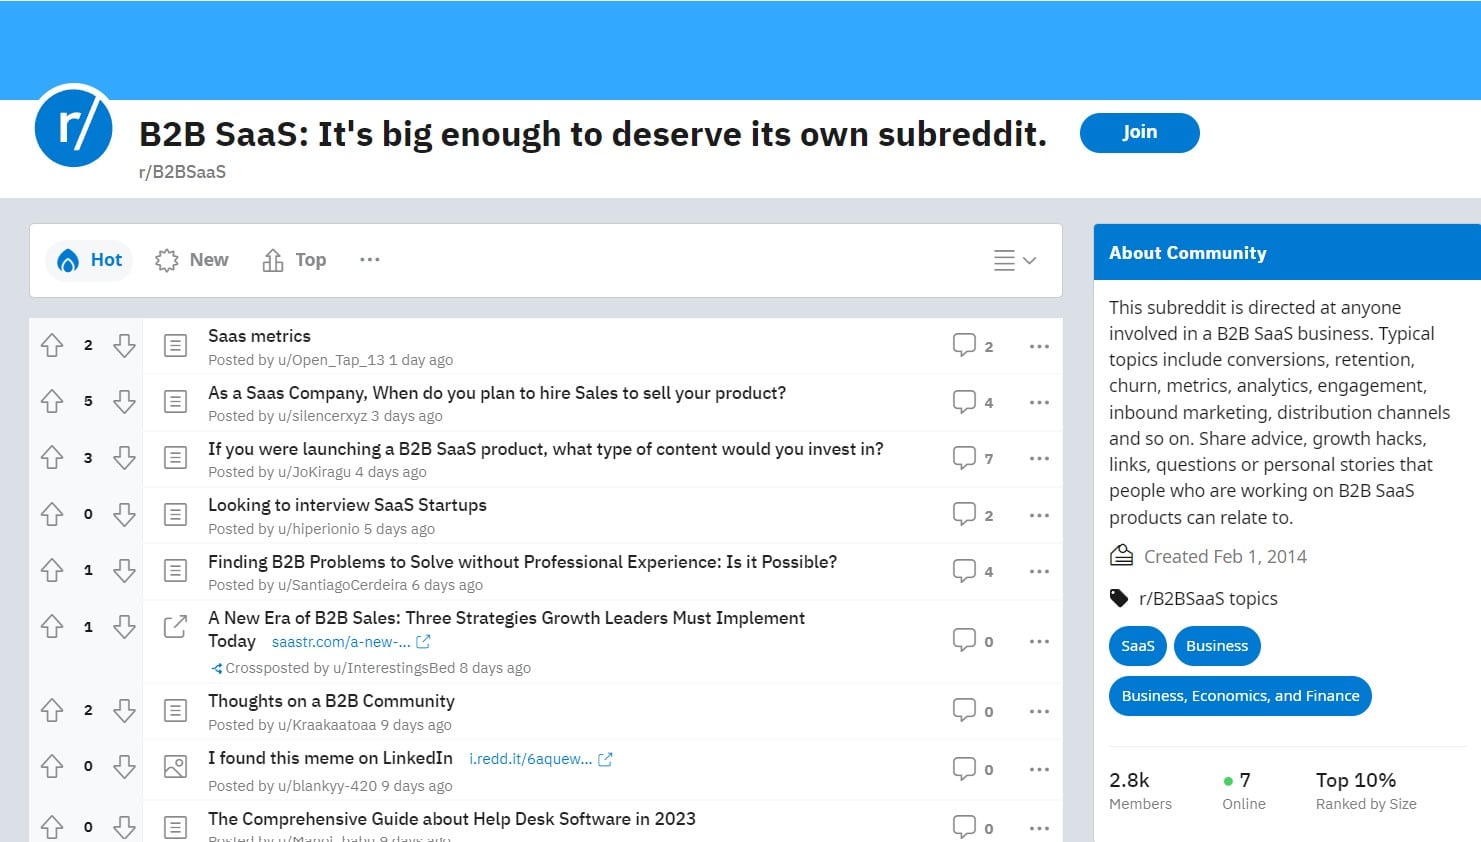 The comprehensive guide to generate revenue posting on Reddit in 2023